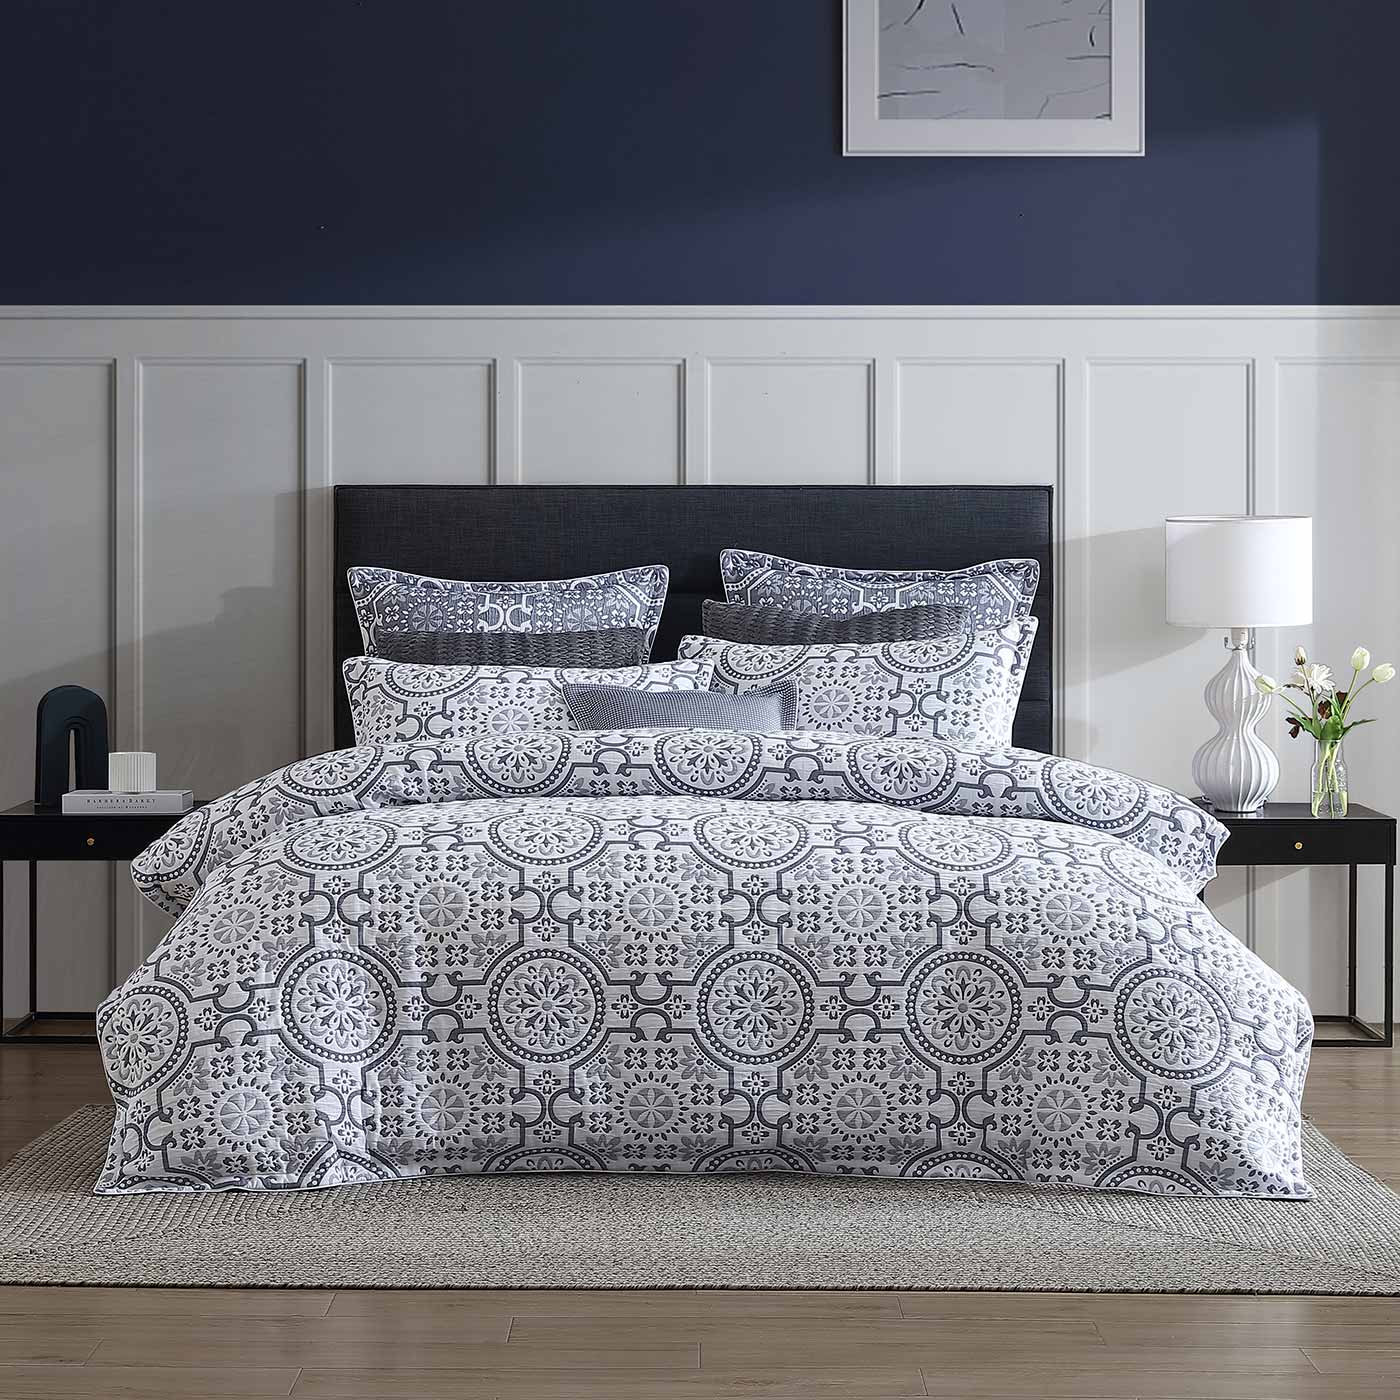 Mayfair Navy Quilt Cover Set by Private Collection